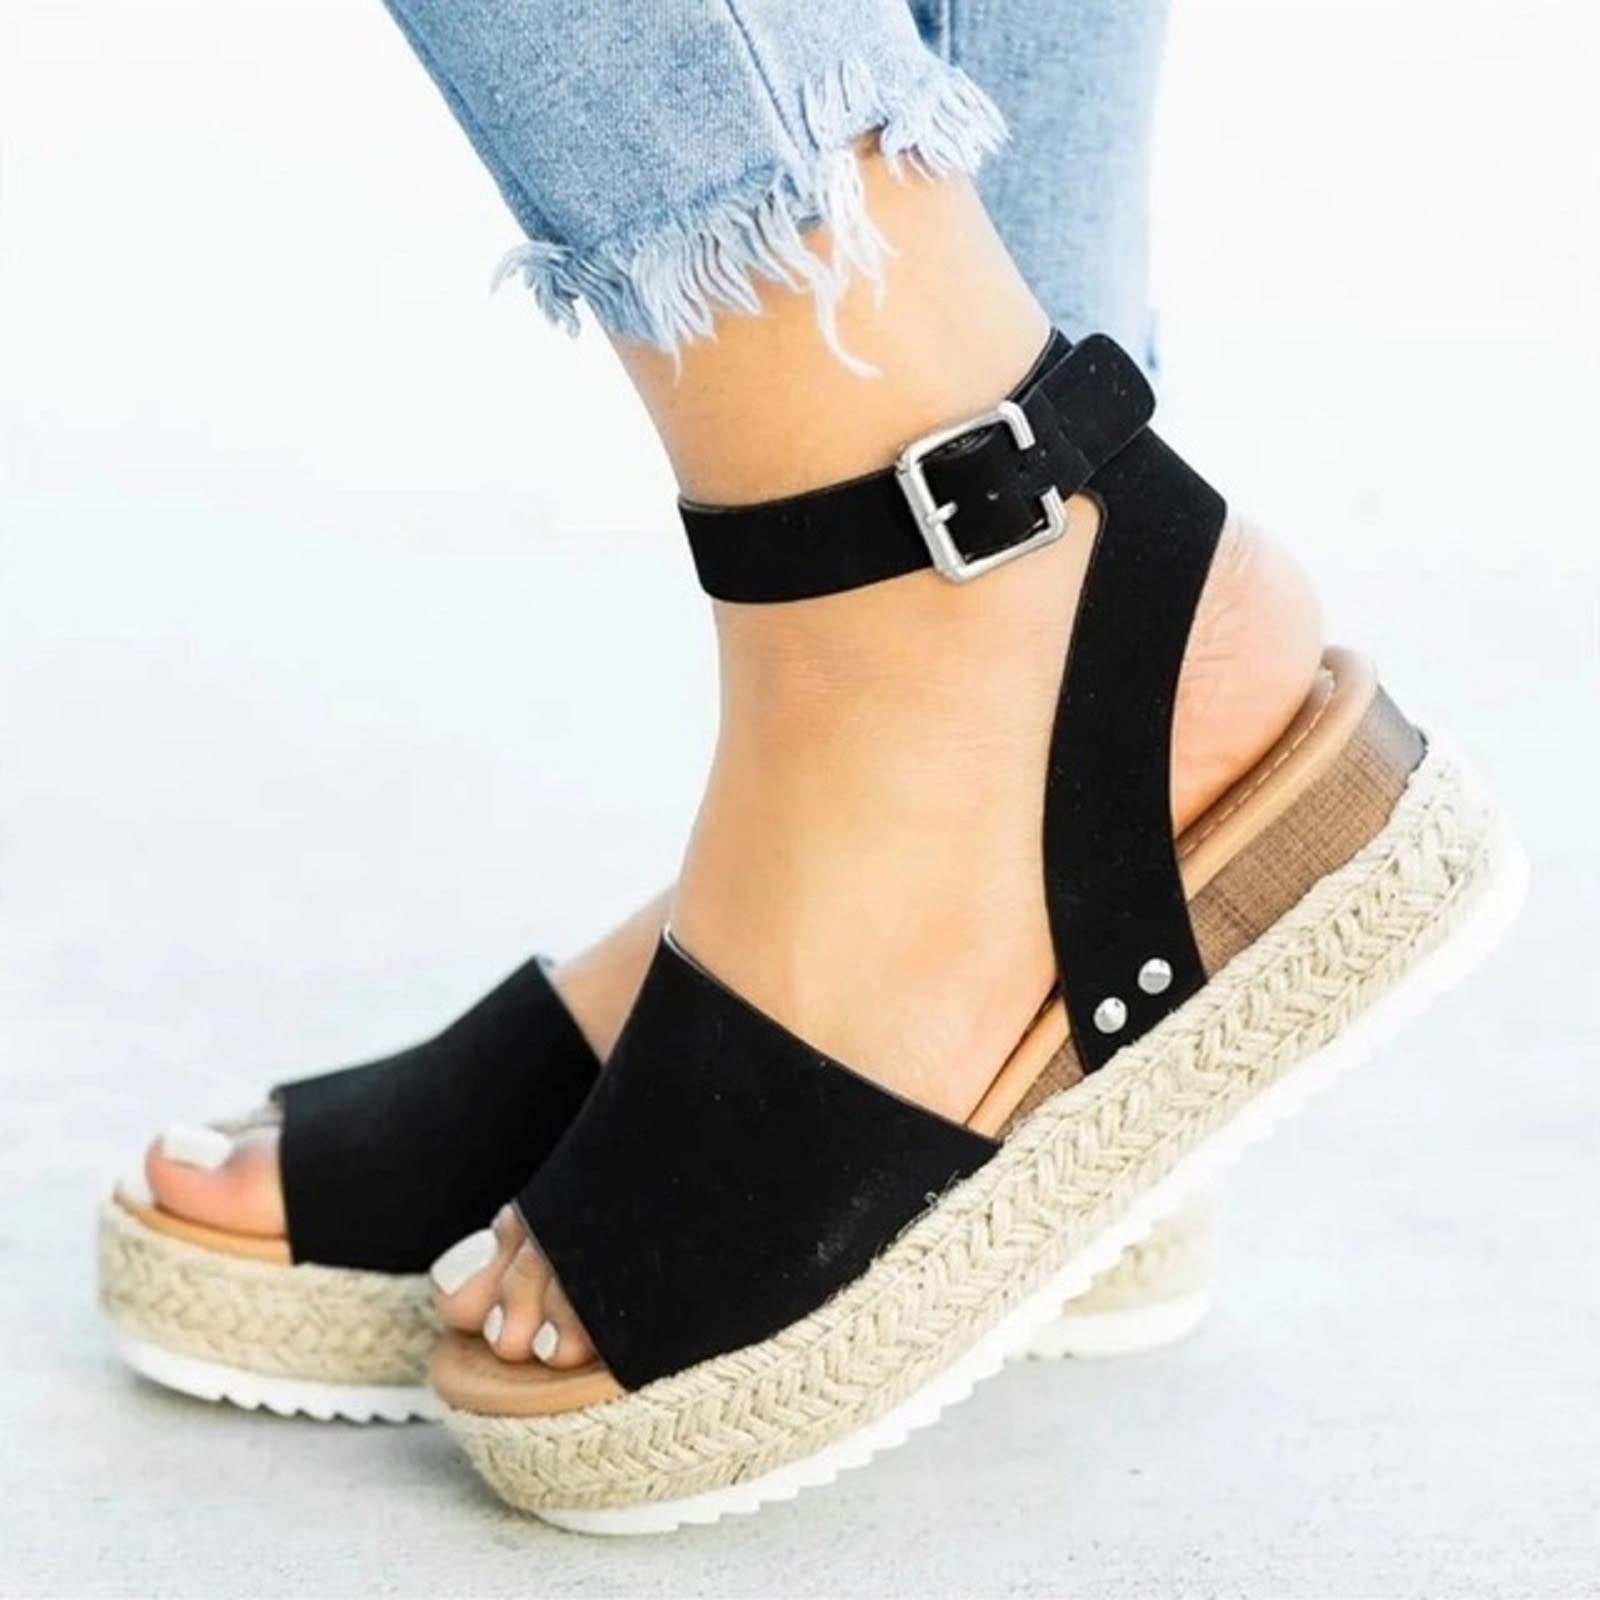 Woman Summer Fashion Sandals Open Toe Casual Platform Wedge Shoes ...